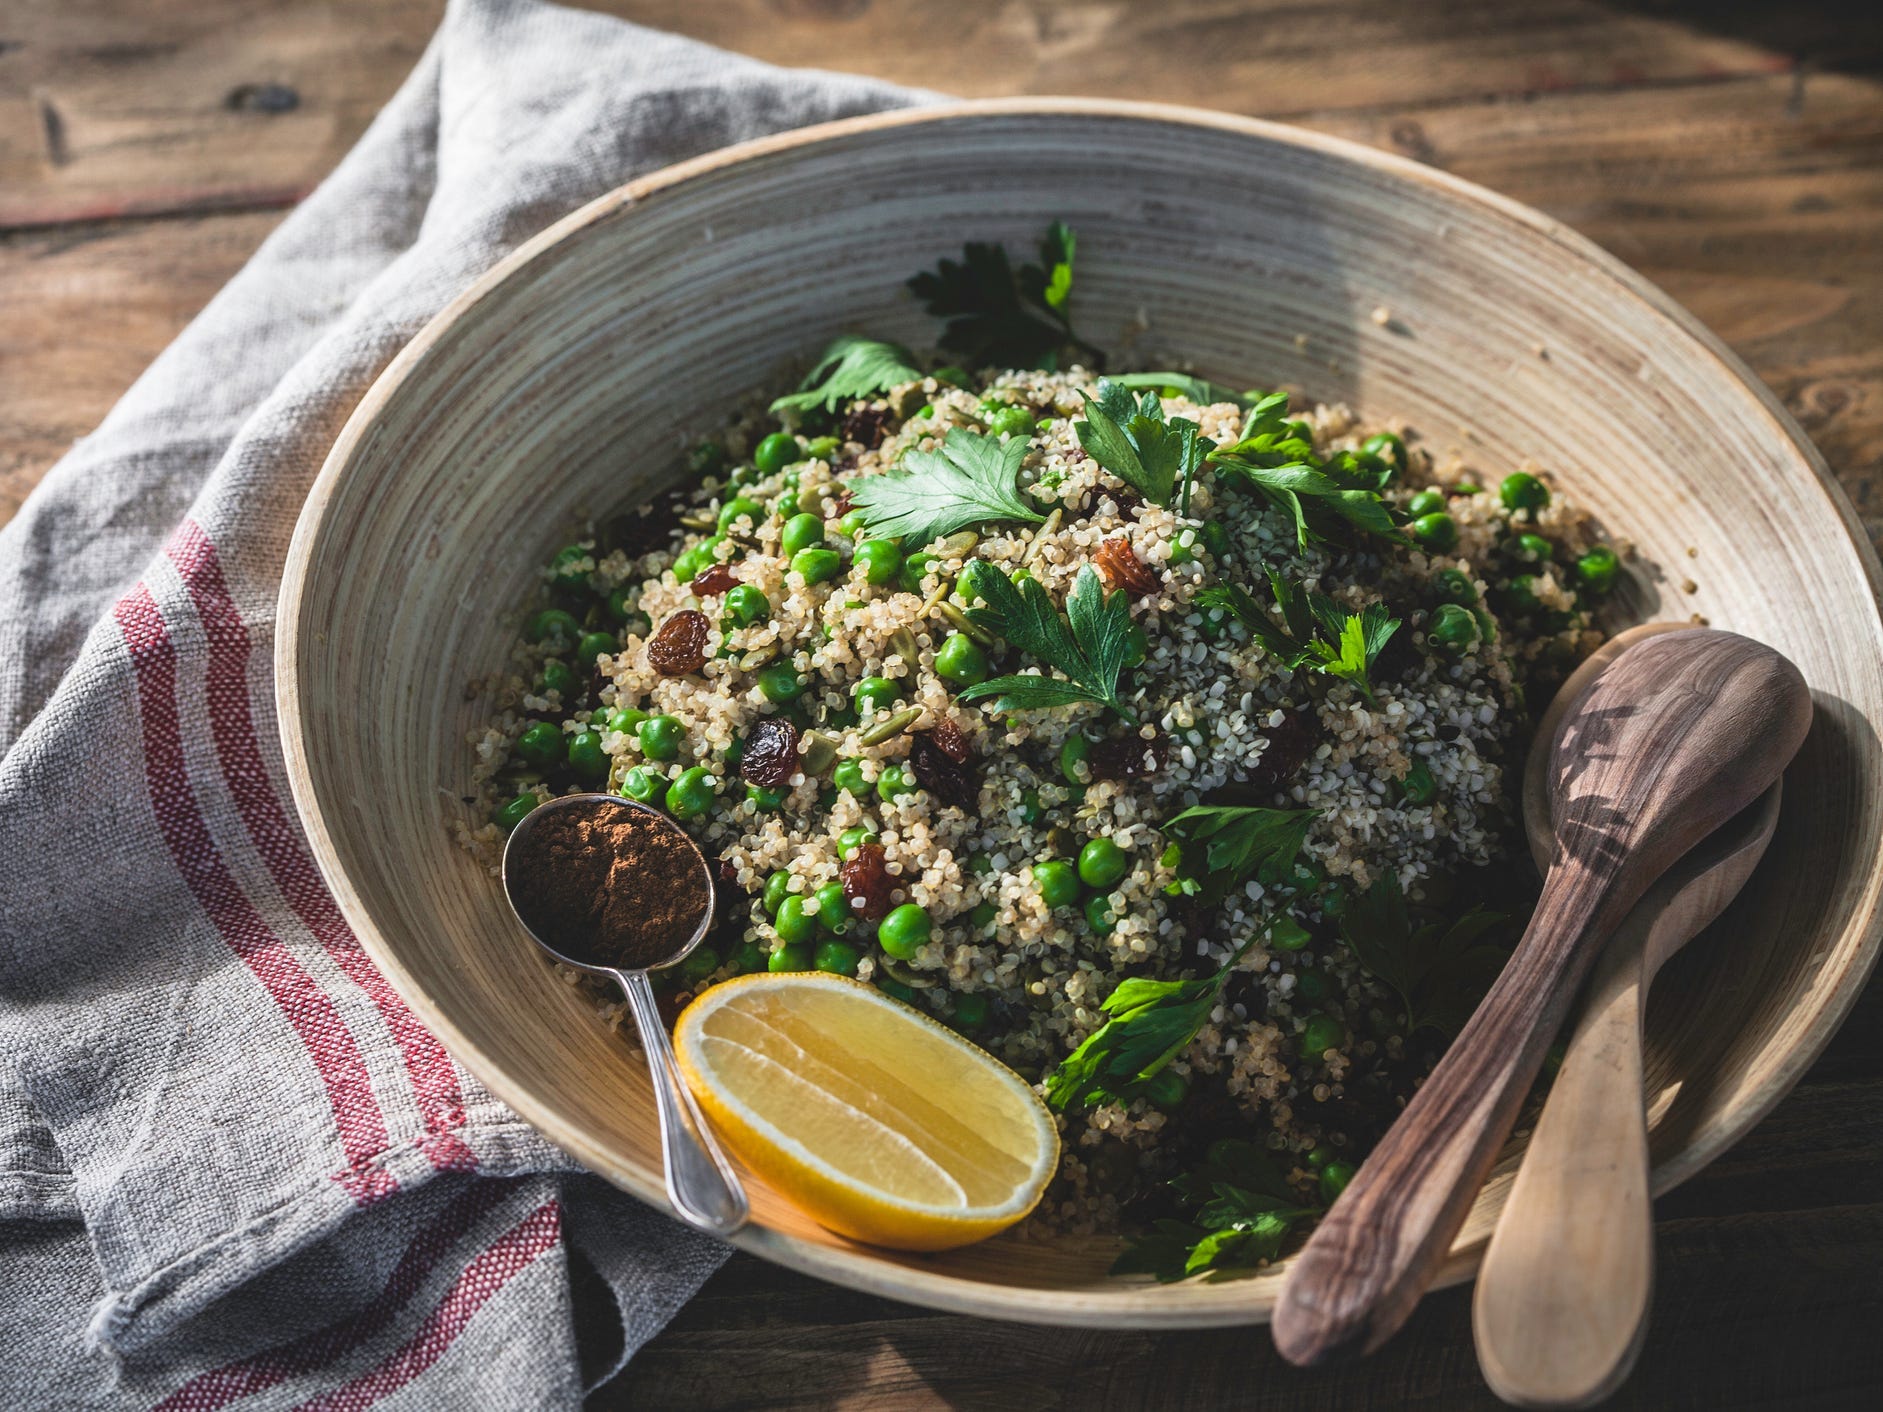 A quinoa bowl with various greens.